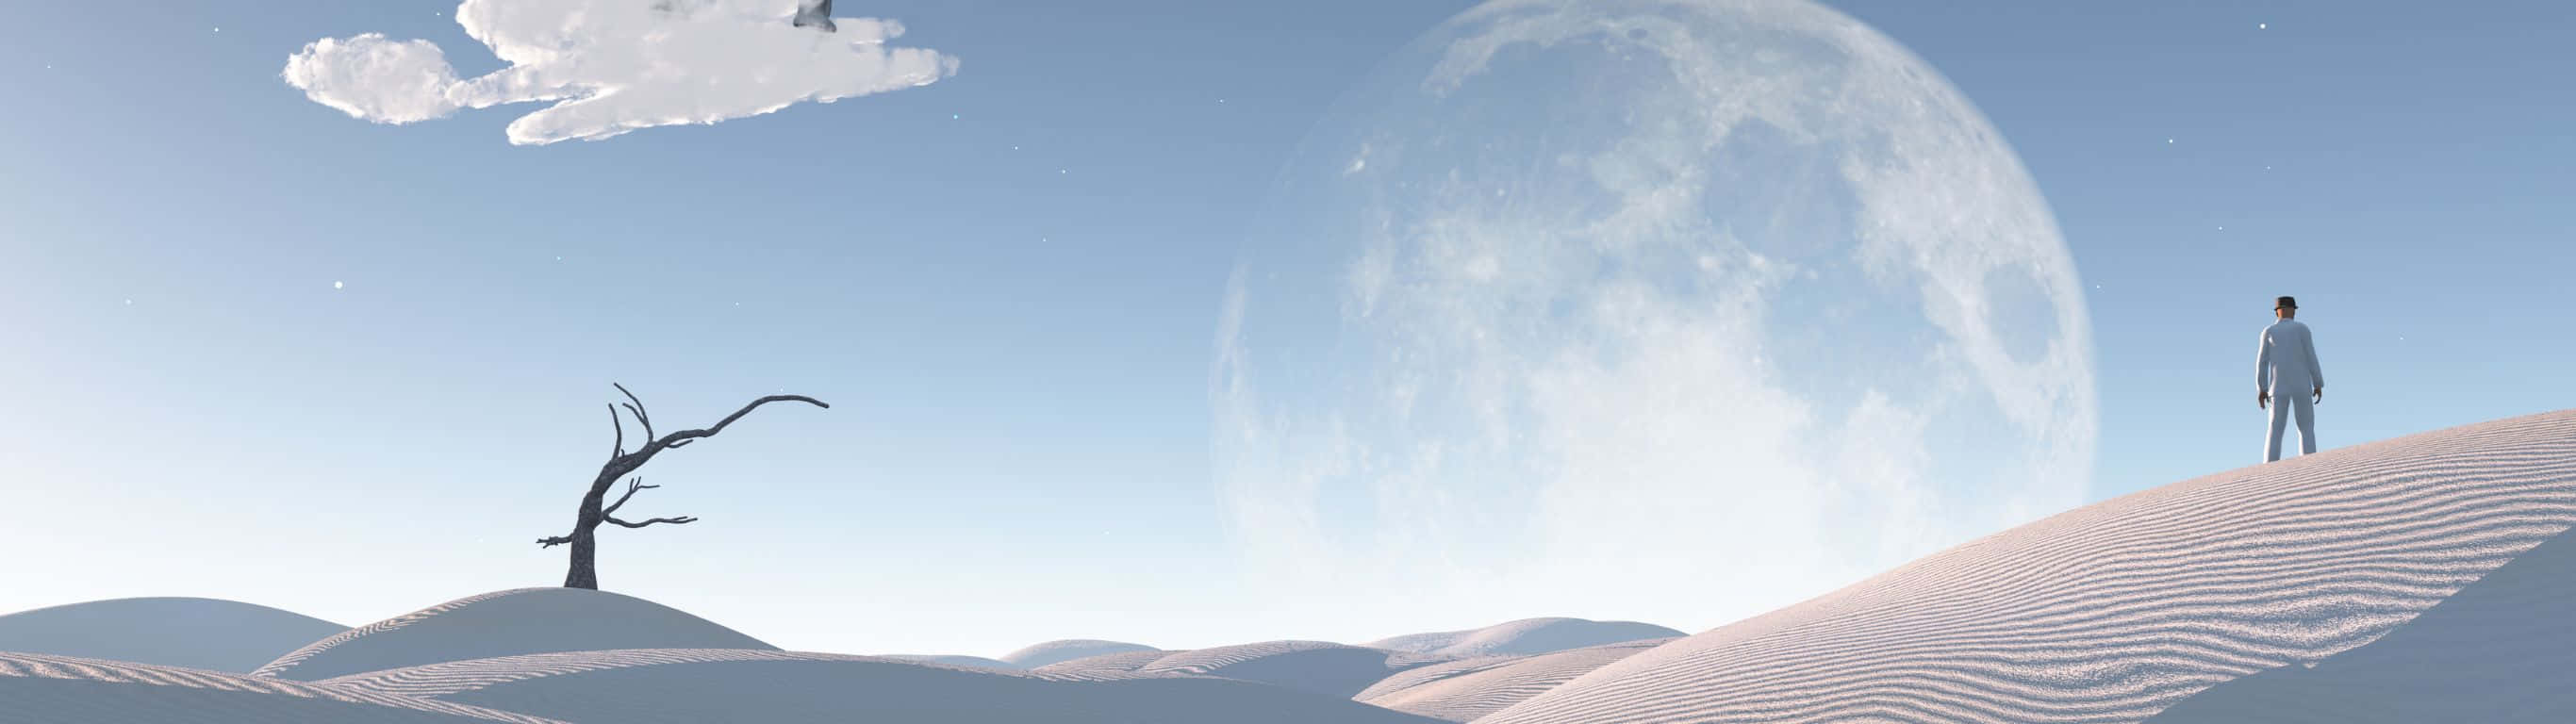 A Man Standing On A Hill With A Moon In The Sky Wallpaper